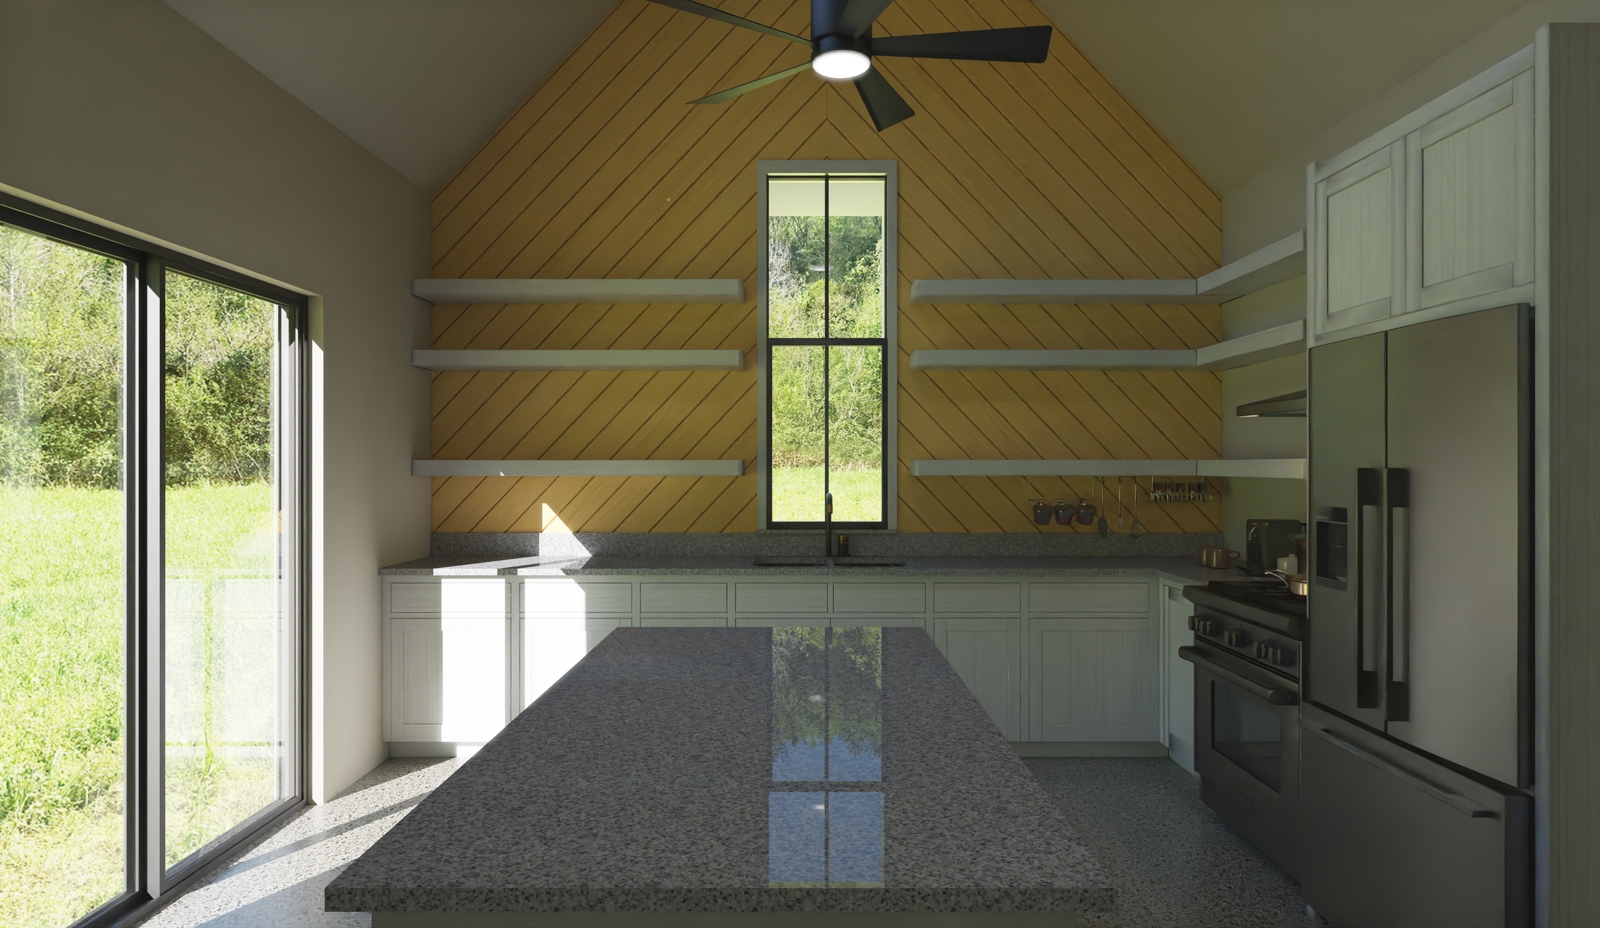 Kitchen-CathedralCeiling-Wood-Angled.jpg